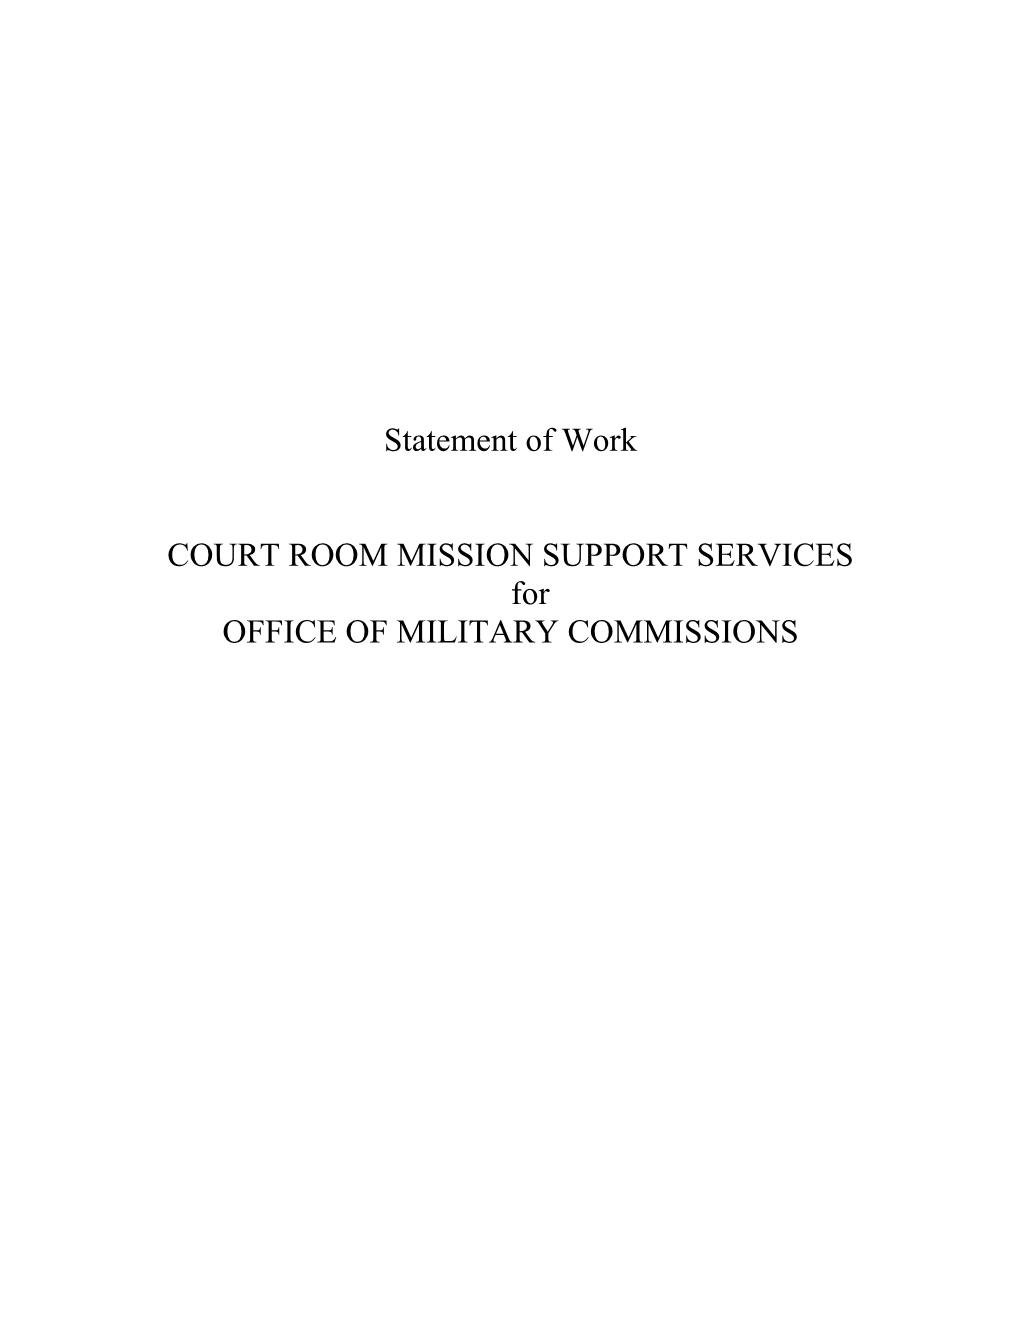 Court Room Mission Support Services